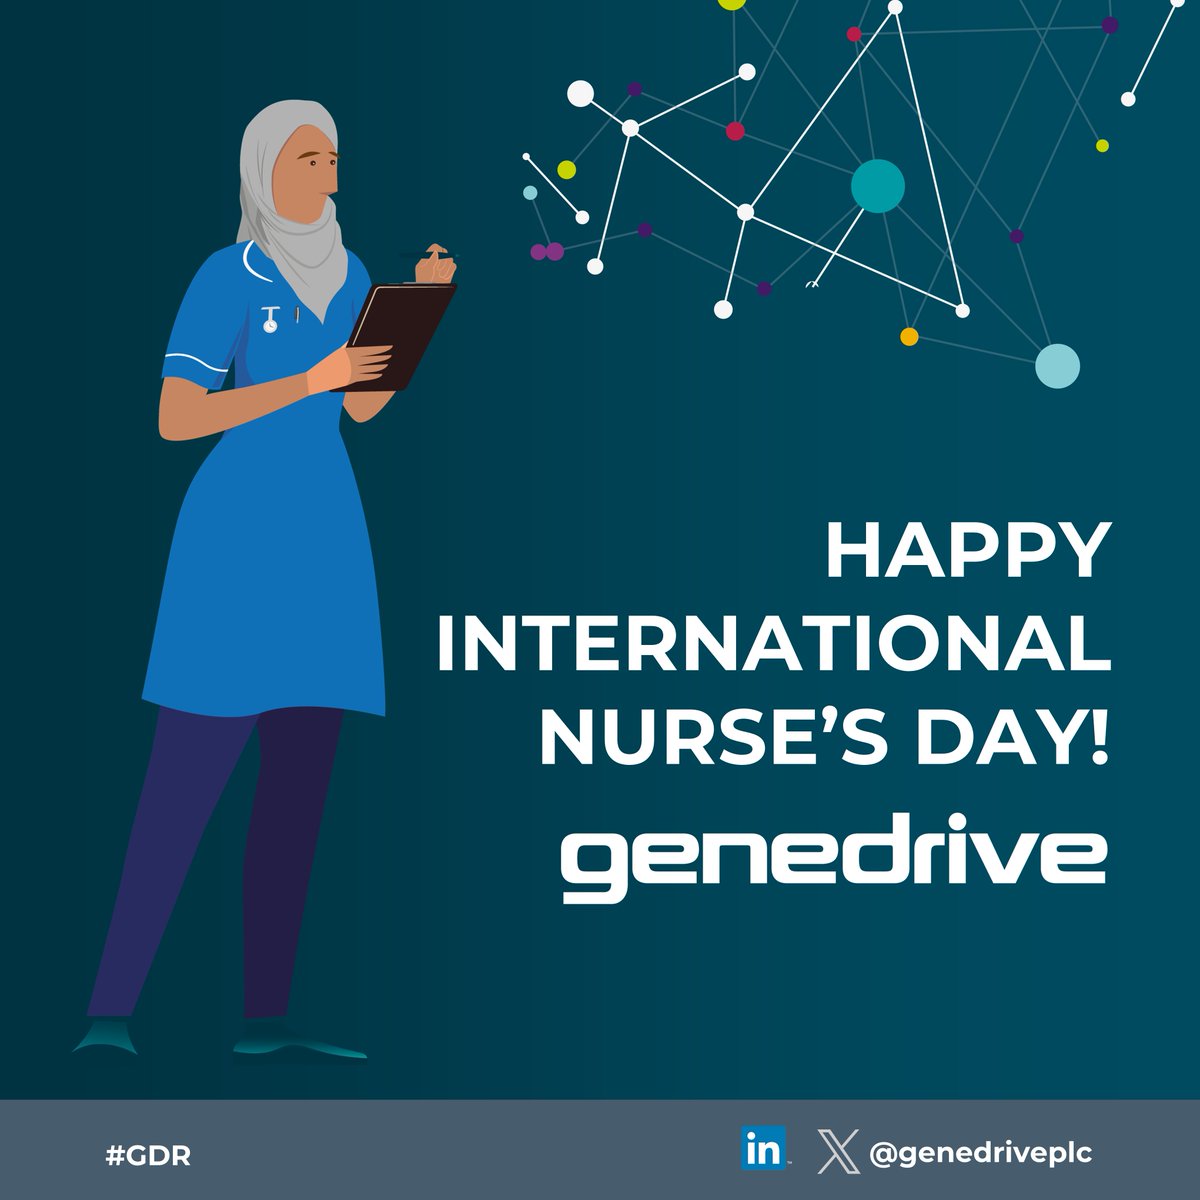 Happy International Nurses Day from all of us at Genedrive!

We are inspired by your hard work and dedication to your patients.

#GDR #InternationalNursesDay